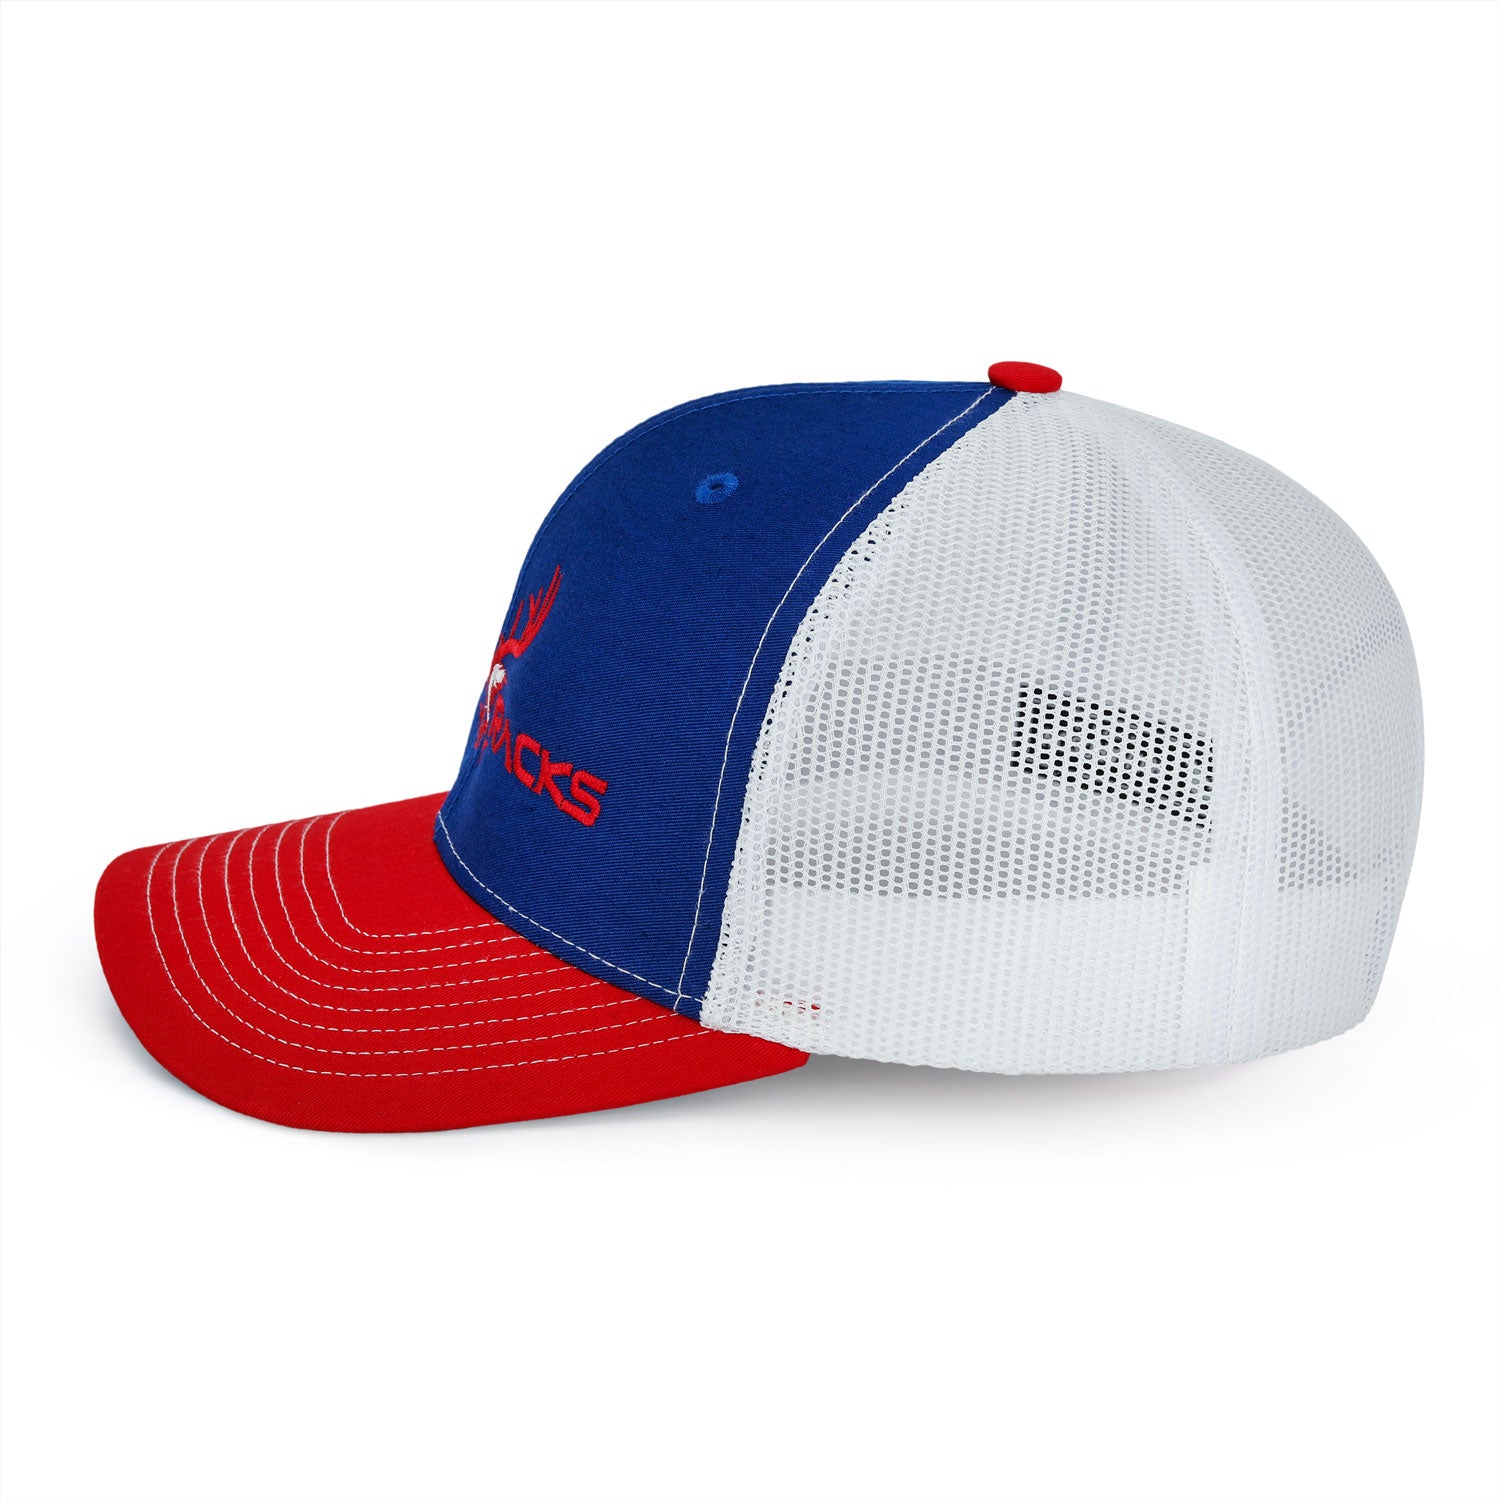 Red/Blue/White Cap